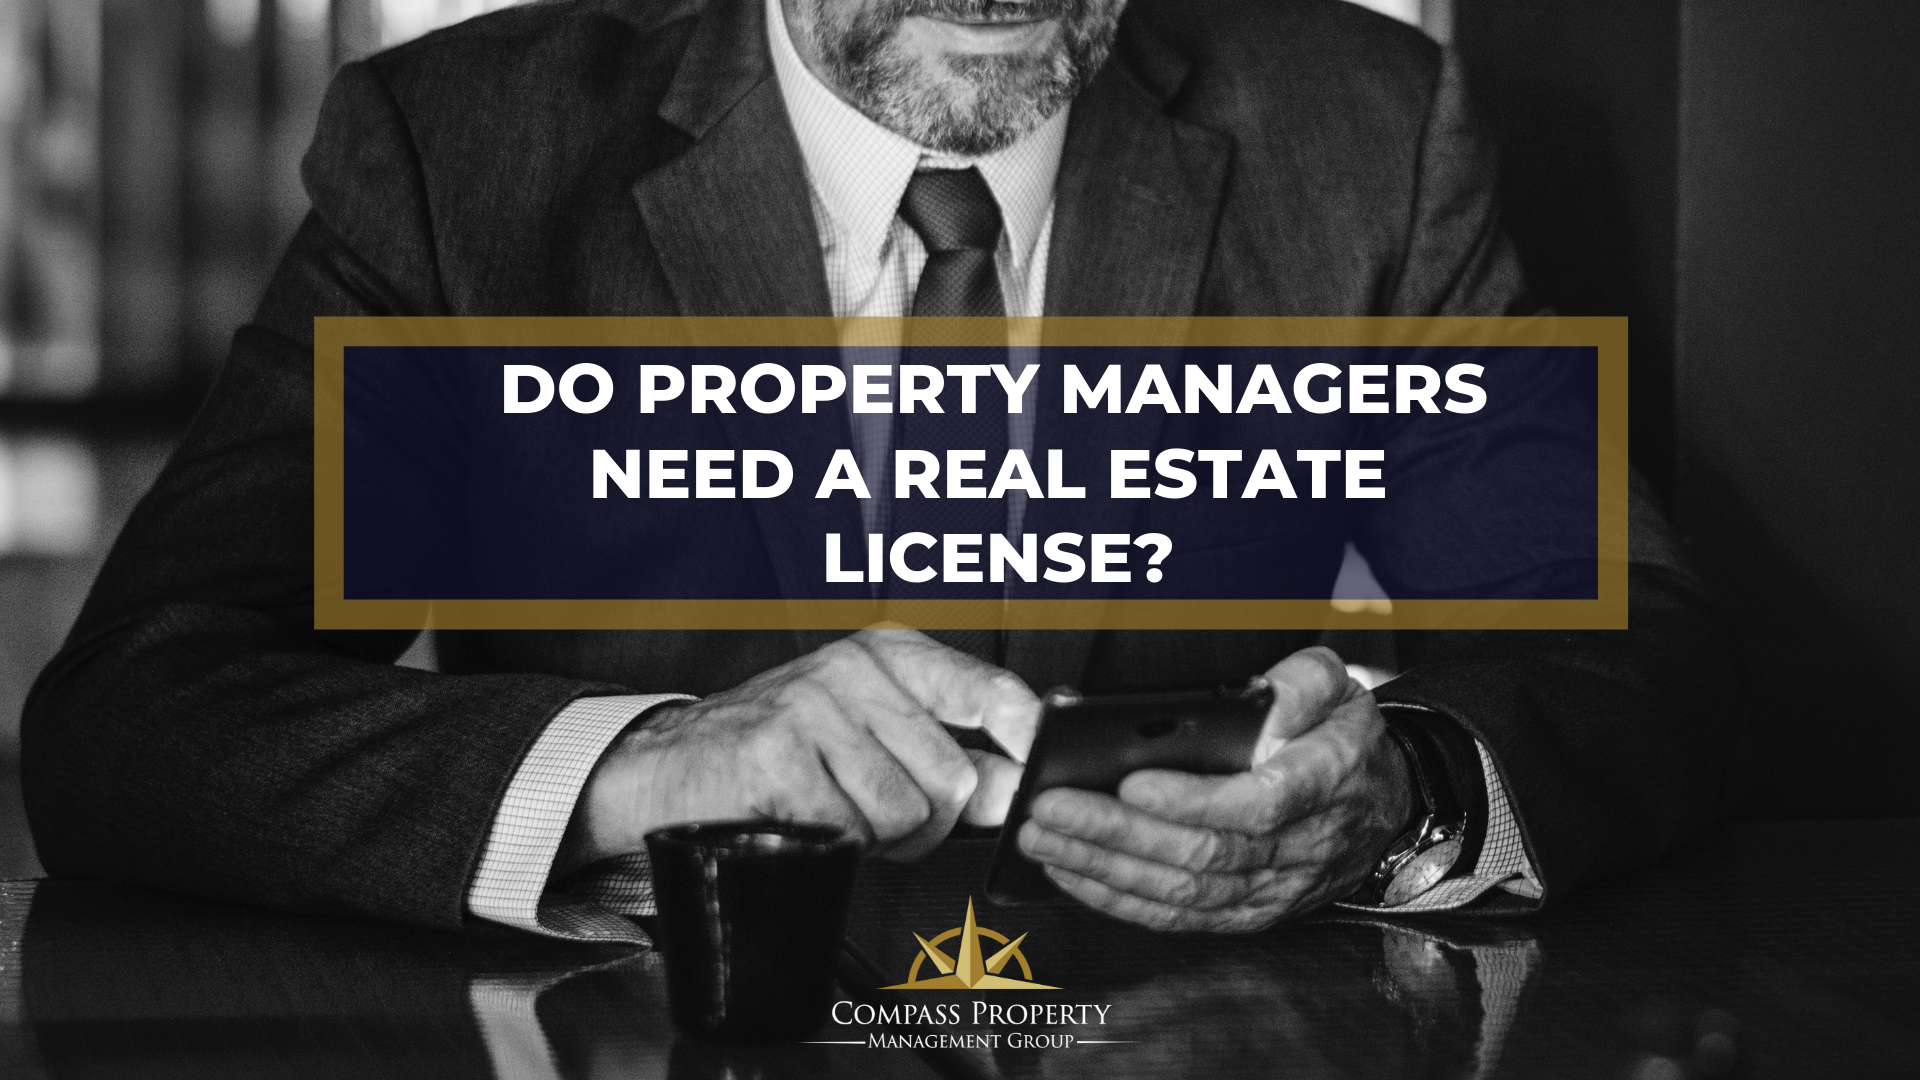 Do You Need A Real Estate License To Be A Property Manager 1 #keepProtocol